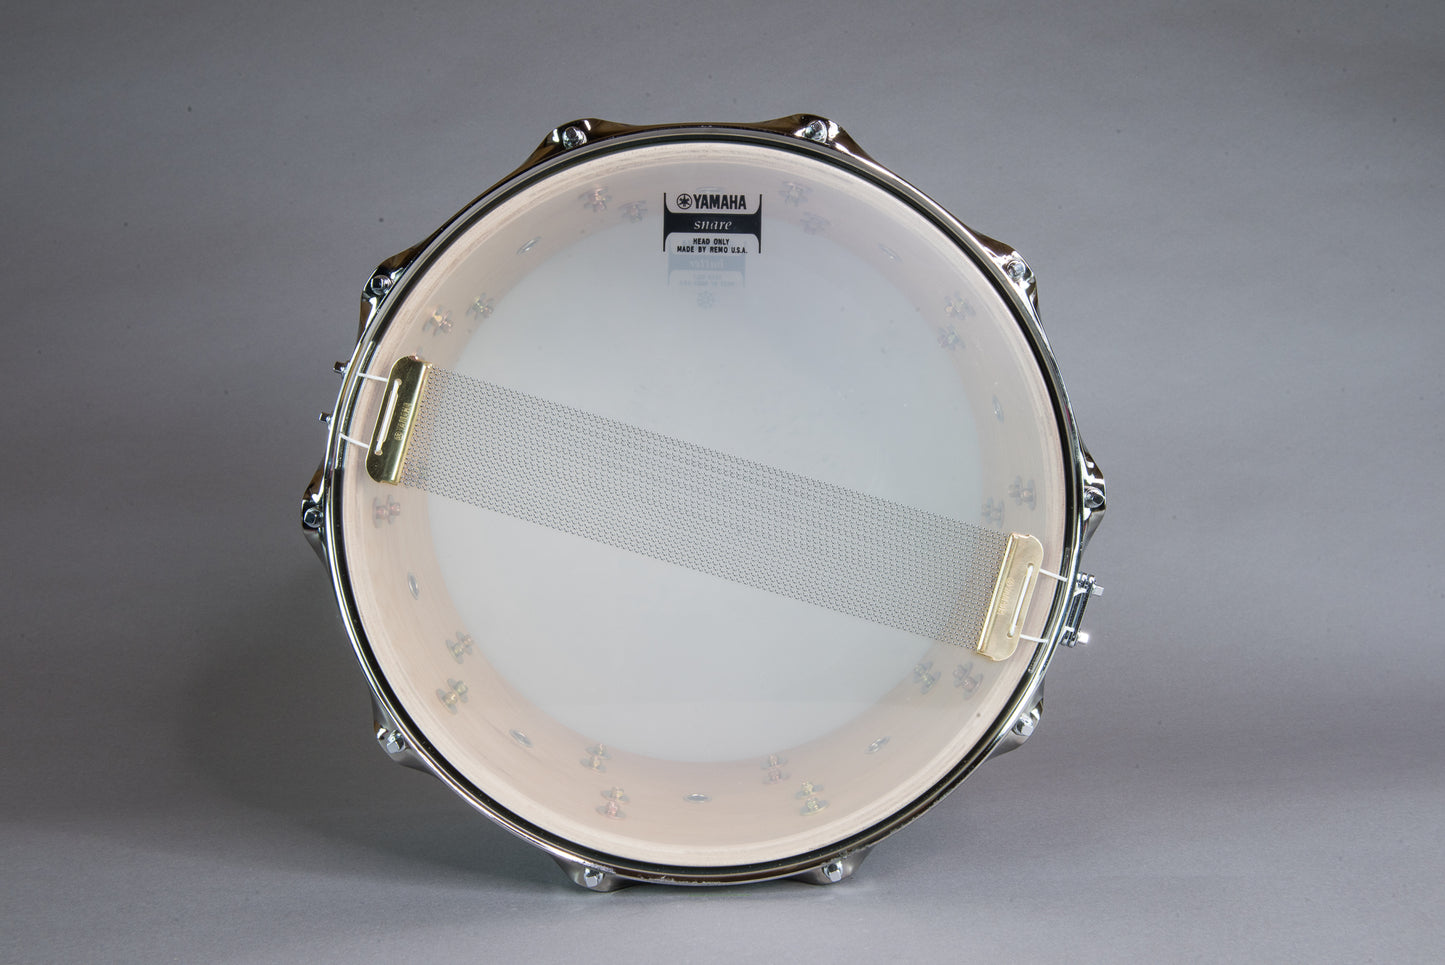 Yamaha 14" x 7" ‘Loud Series’ Snare Drum in Solid Silver